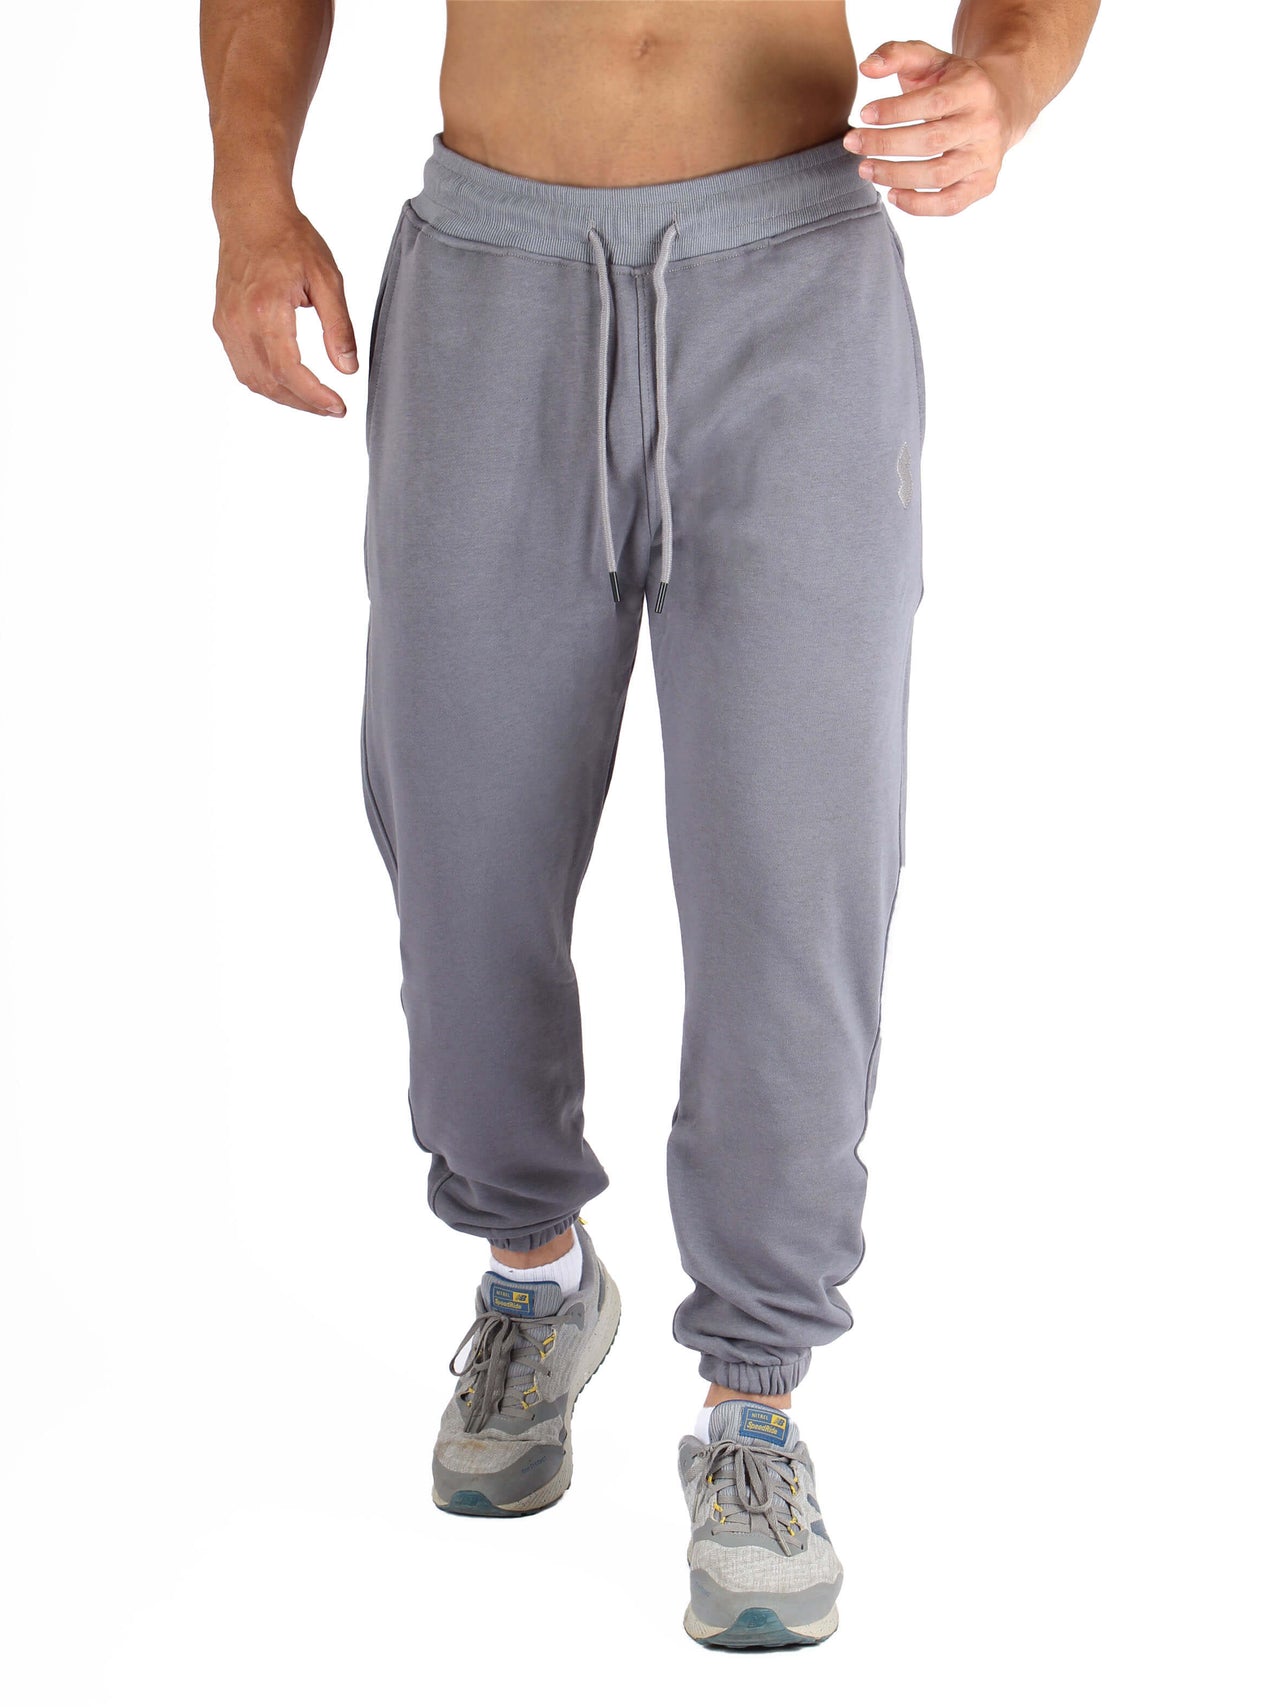 Daily Track Pants - Gray